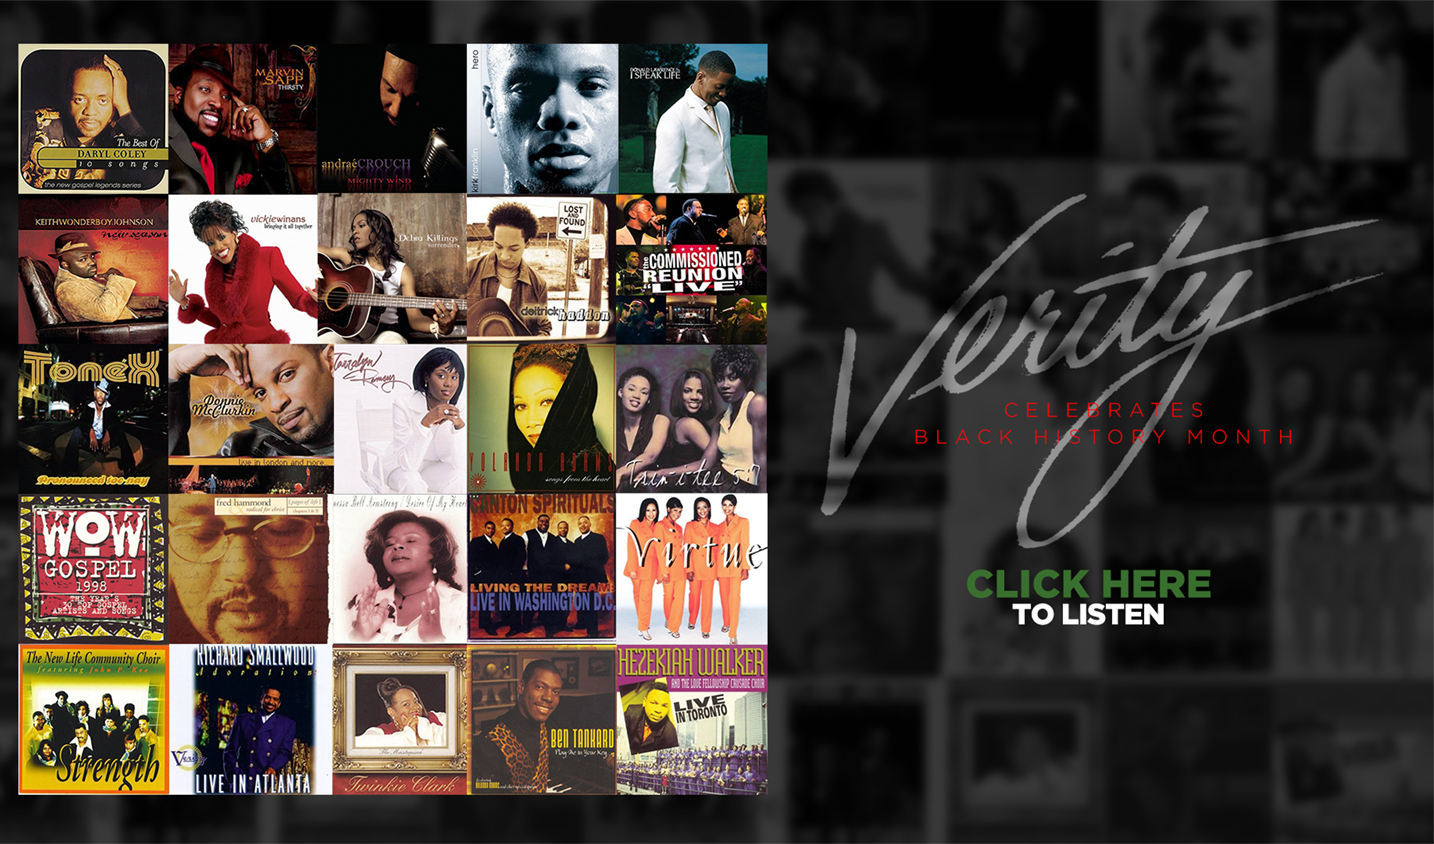 Verity celebrates black history month - click here to listen